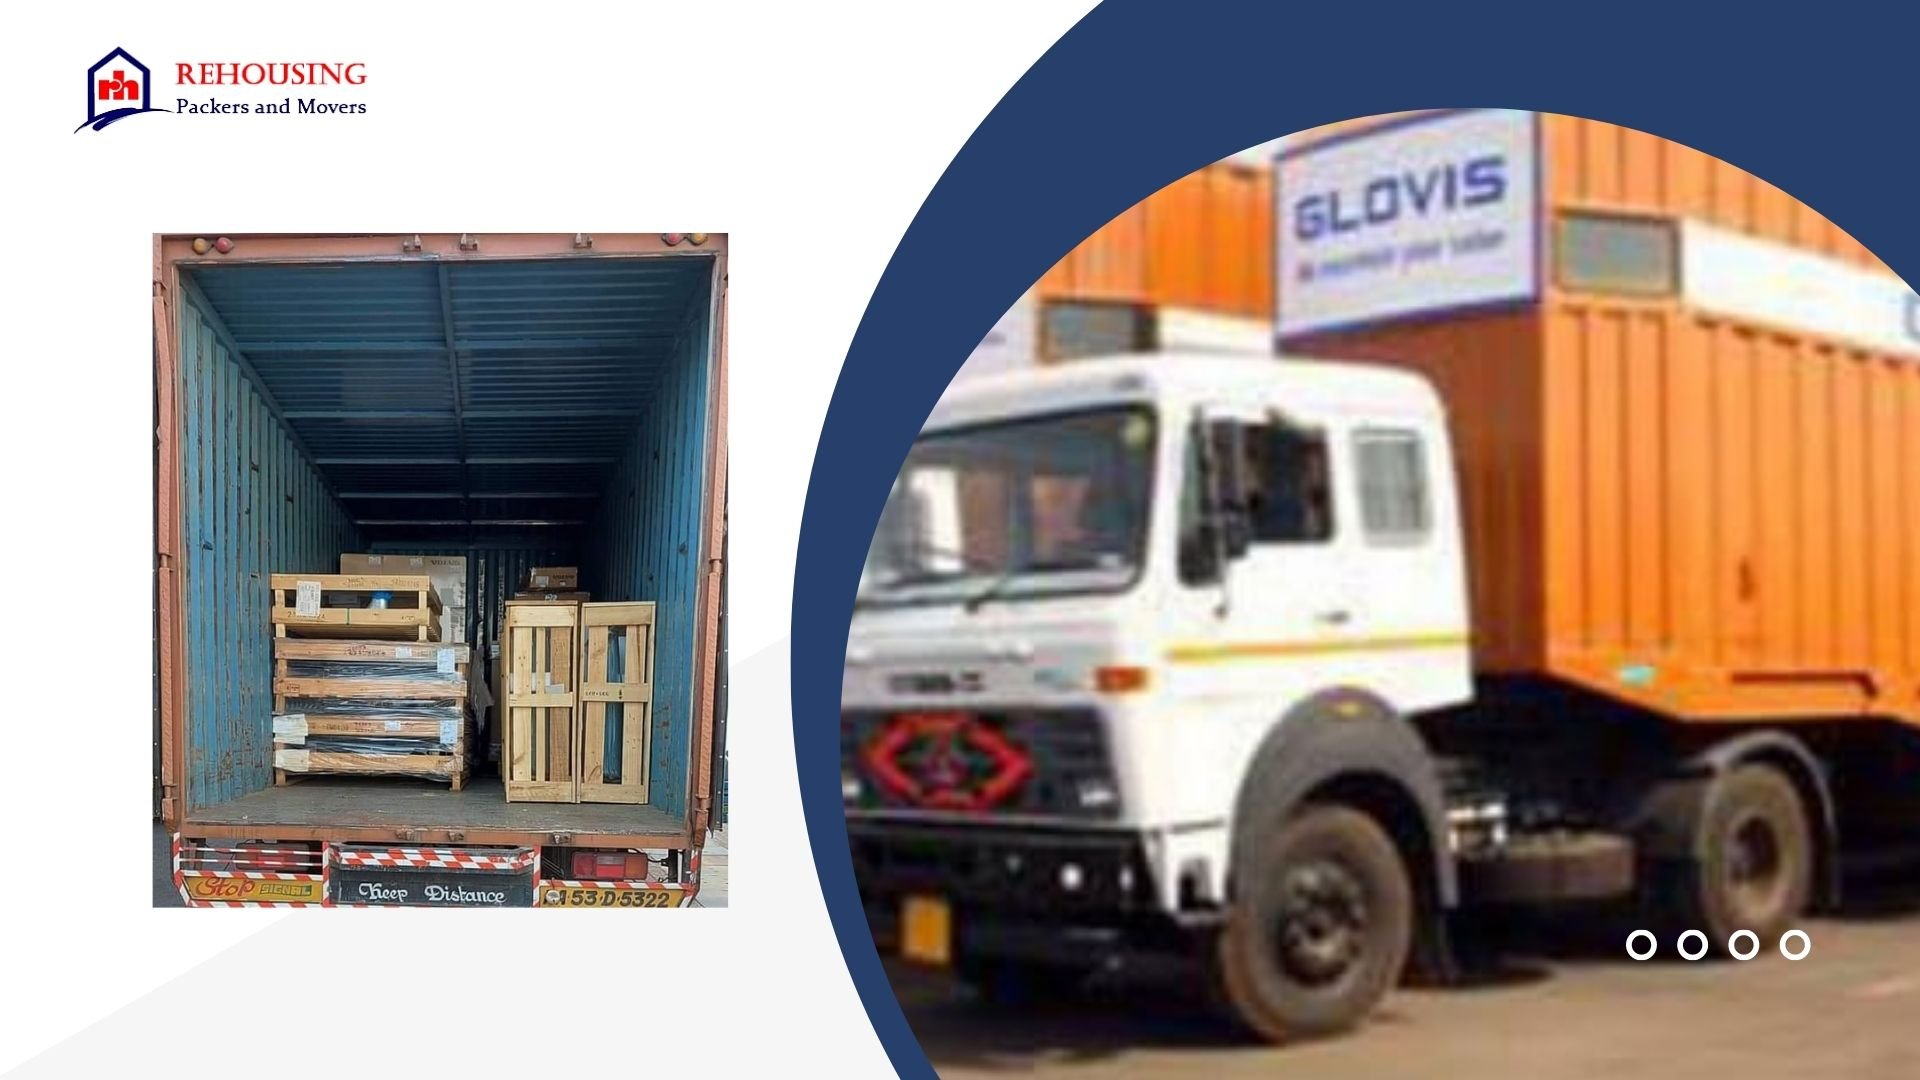 Packers and Movers From Dehradun to Kochi | Rehousing packers and movers